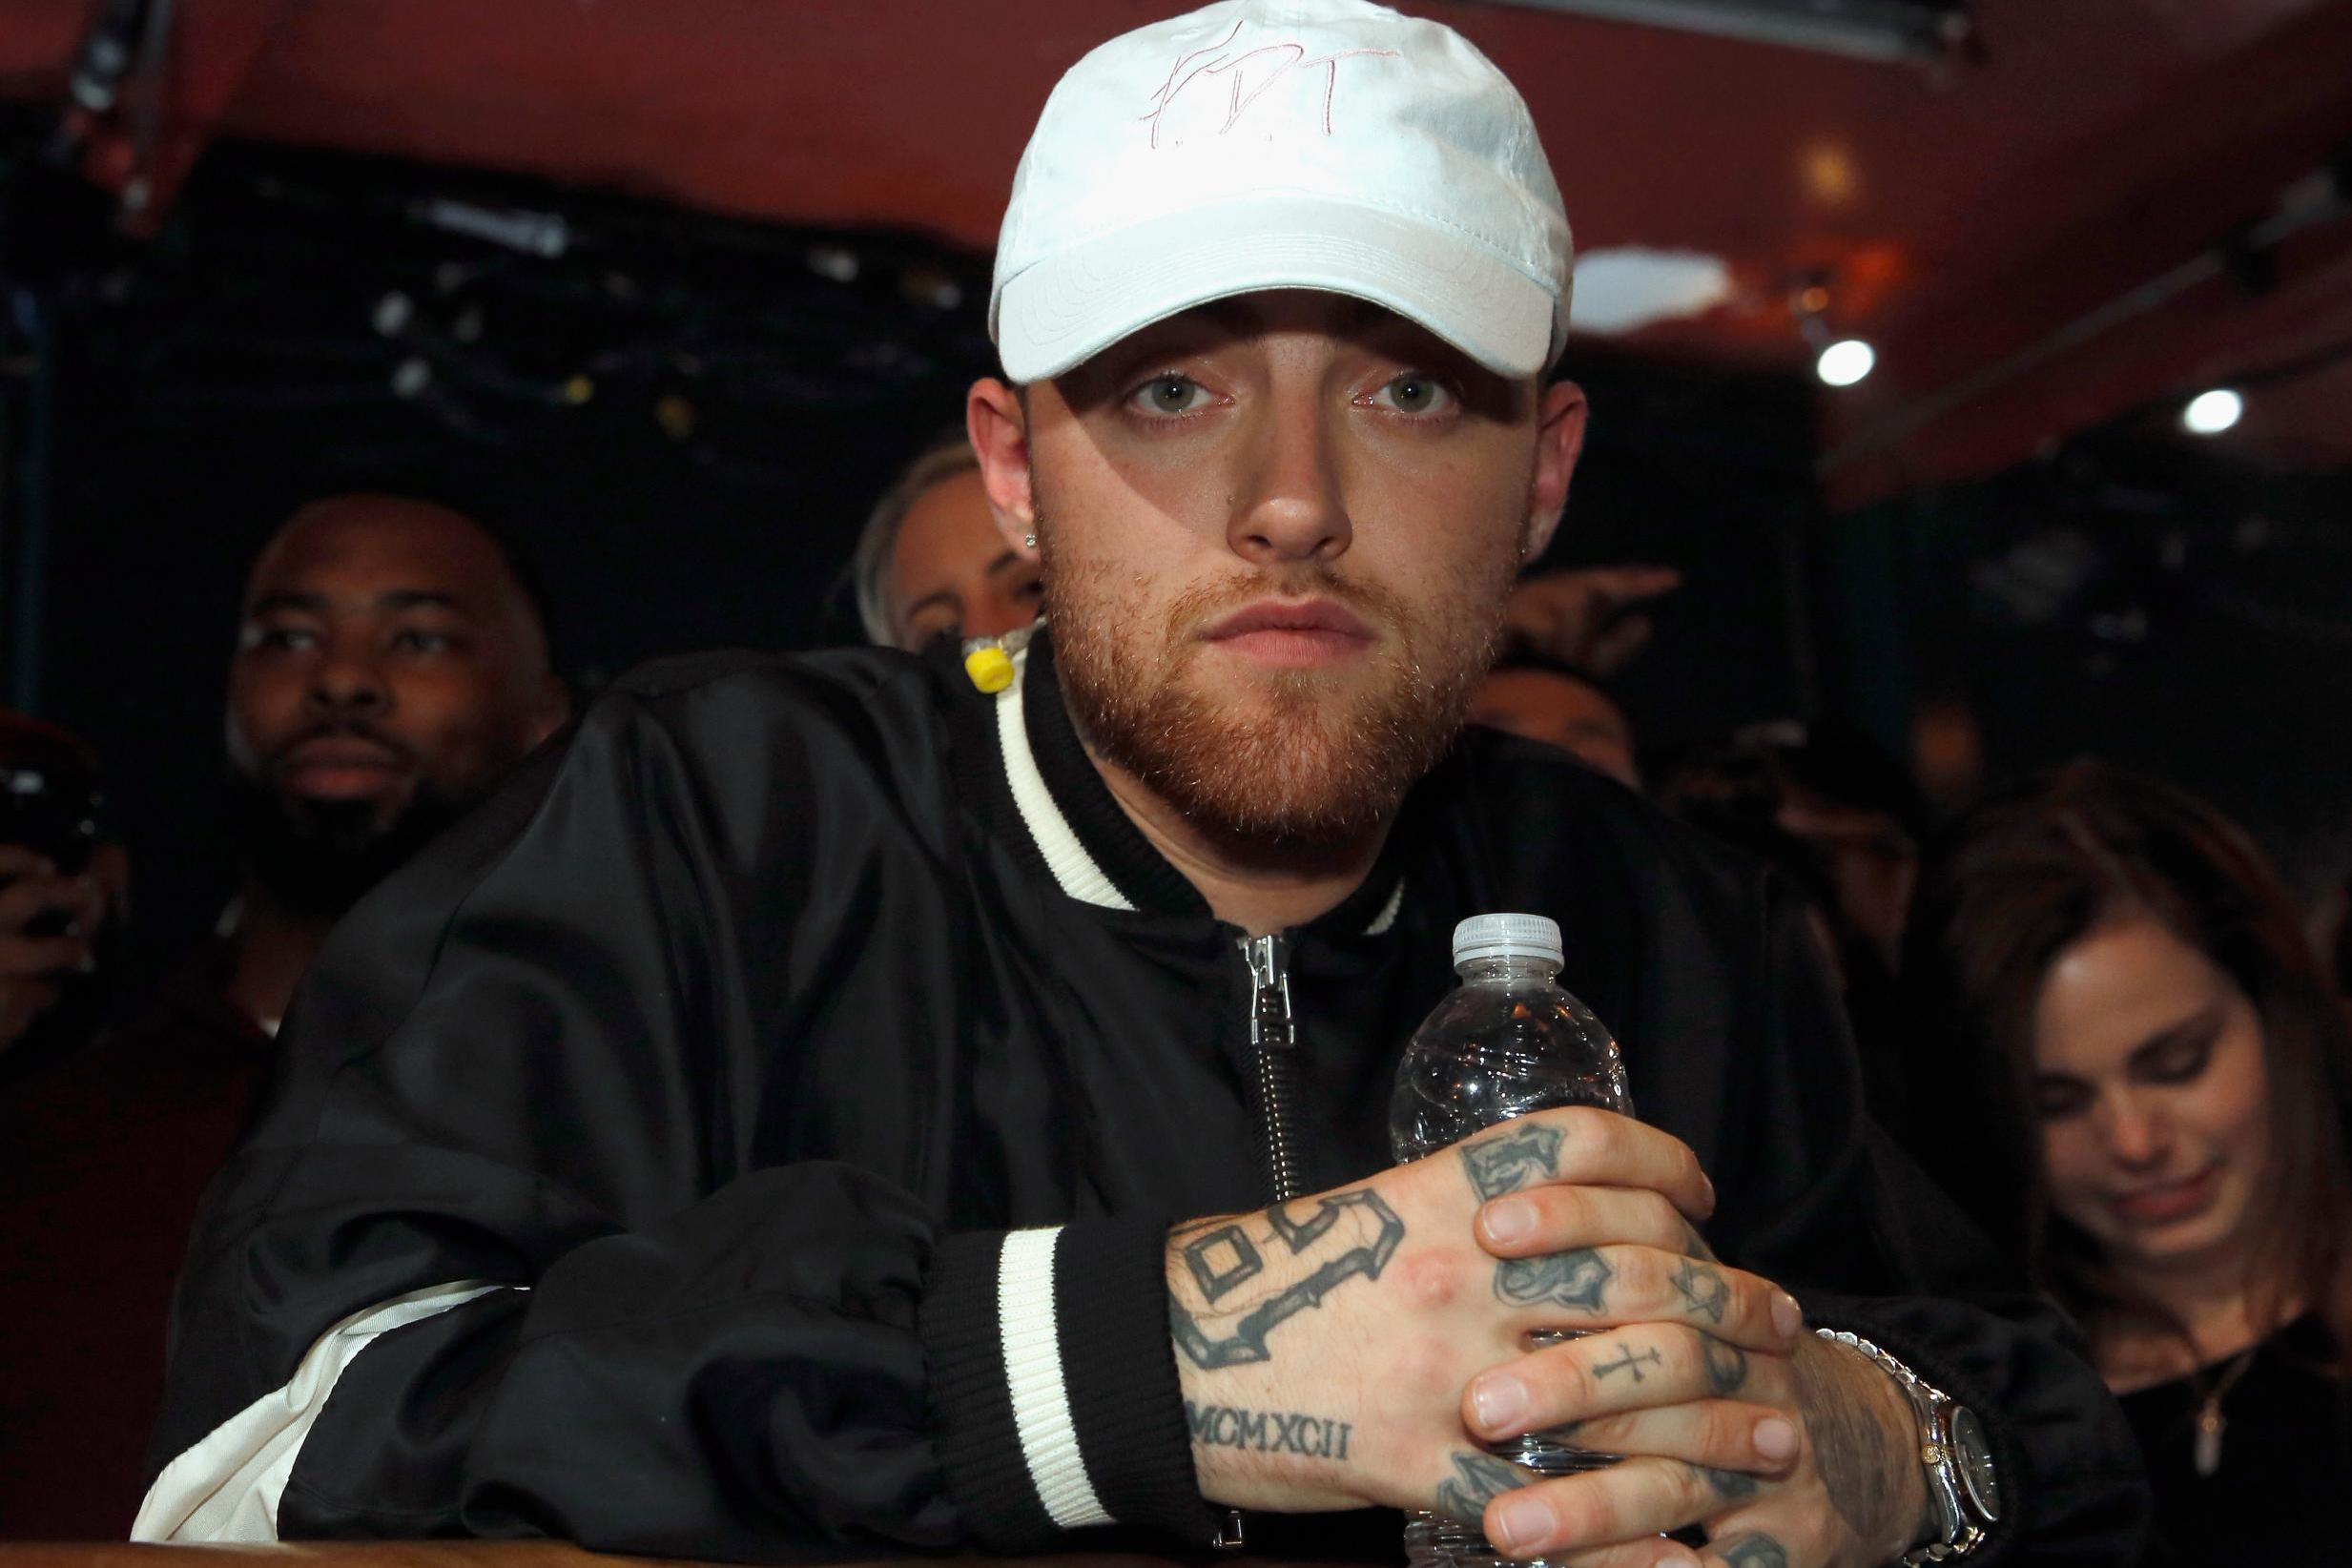 Mac Miller death Man charged for selling fake opioids to rapper days before fatal overdose The Independent The Independent